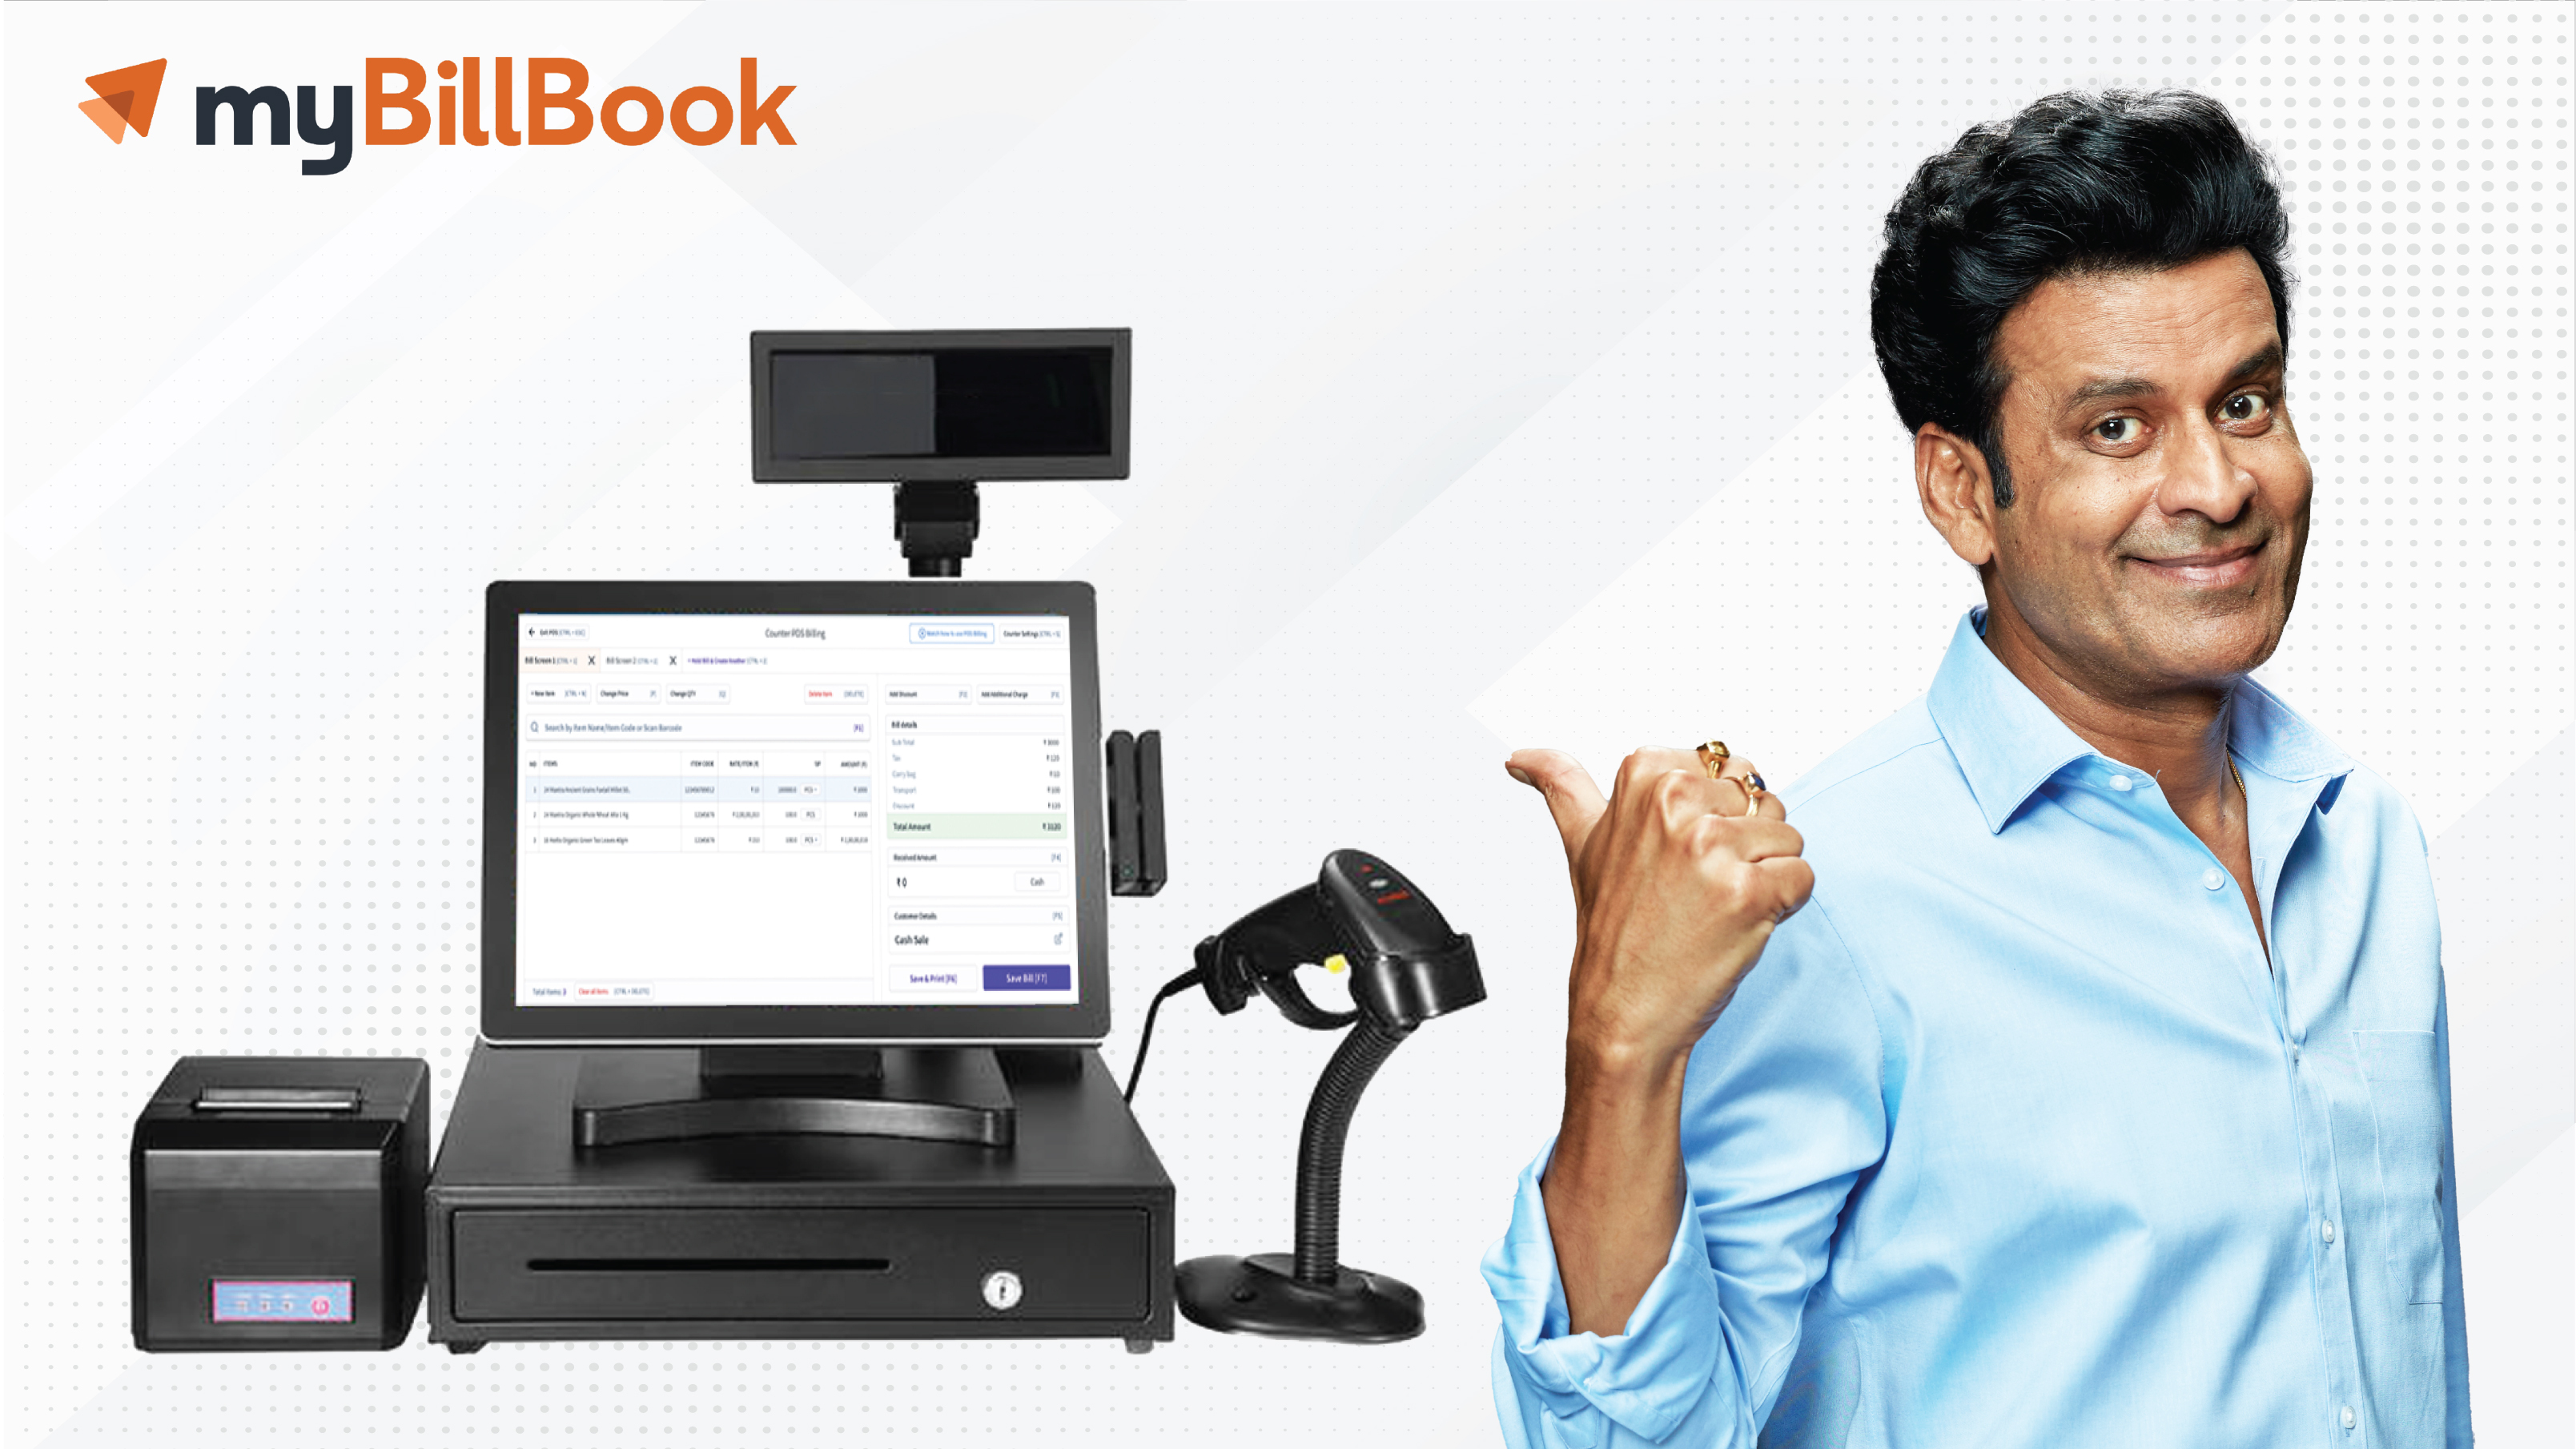 myBillBook launches POS Billing, a complete billing & inventory solution for retailers & franchises